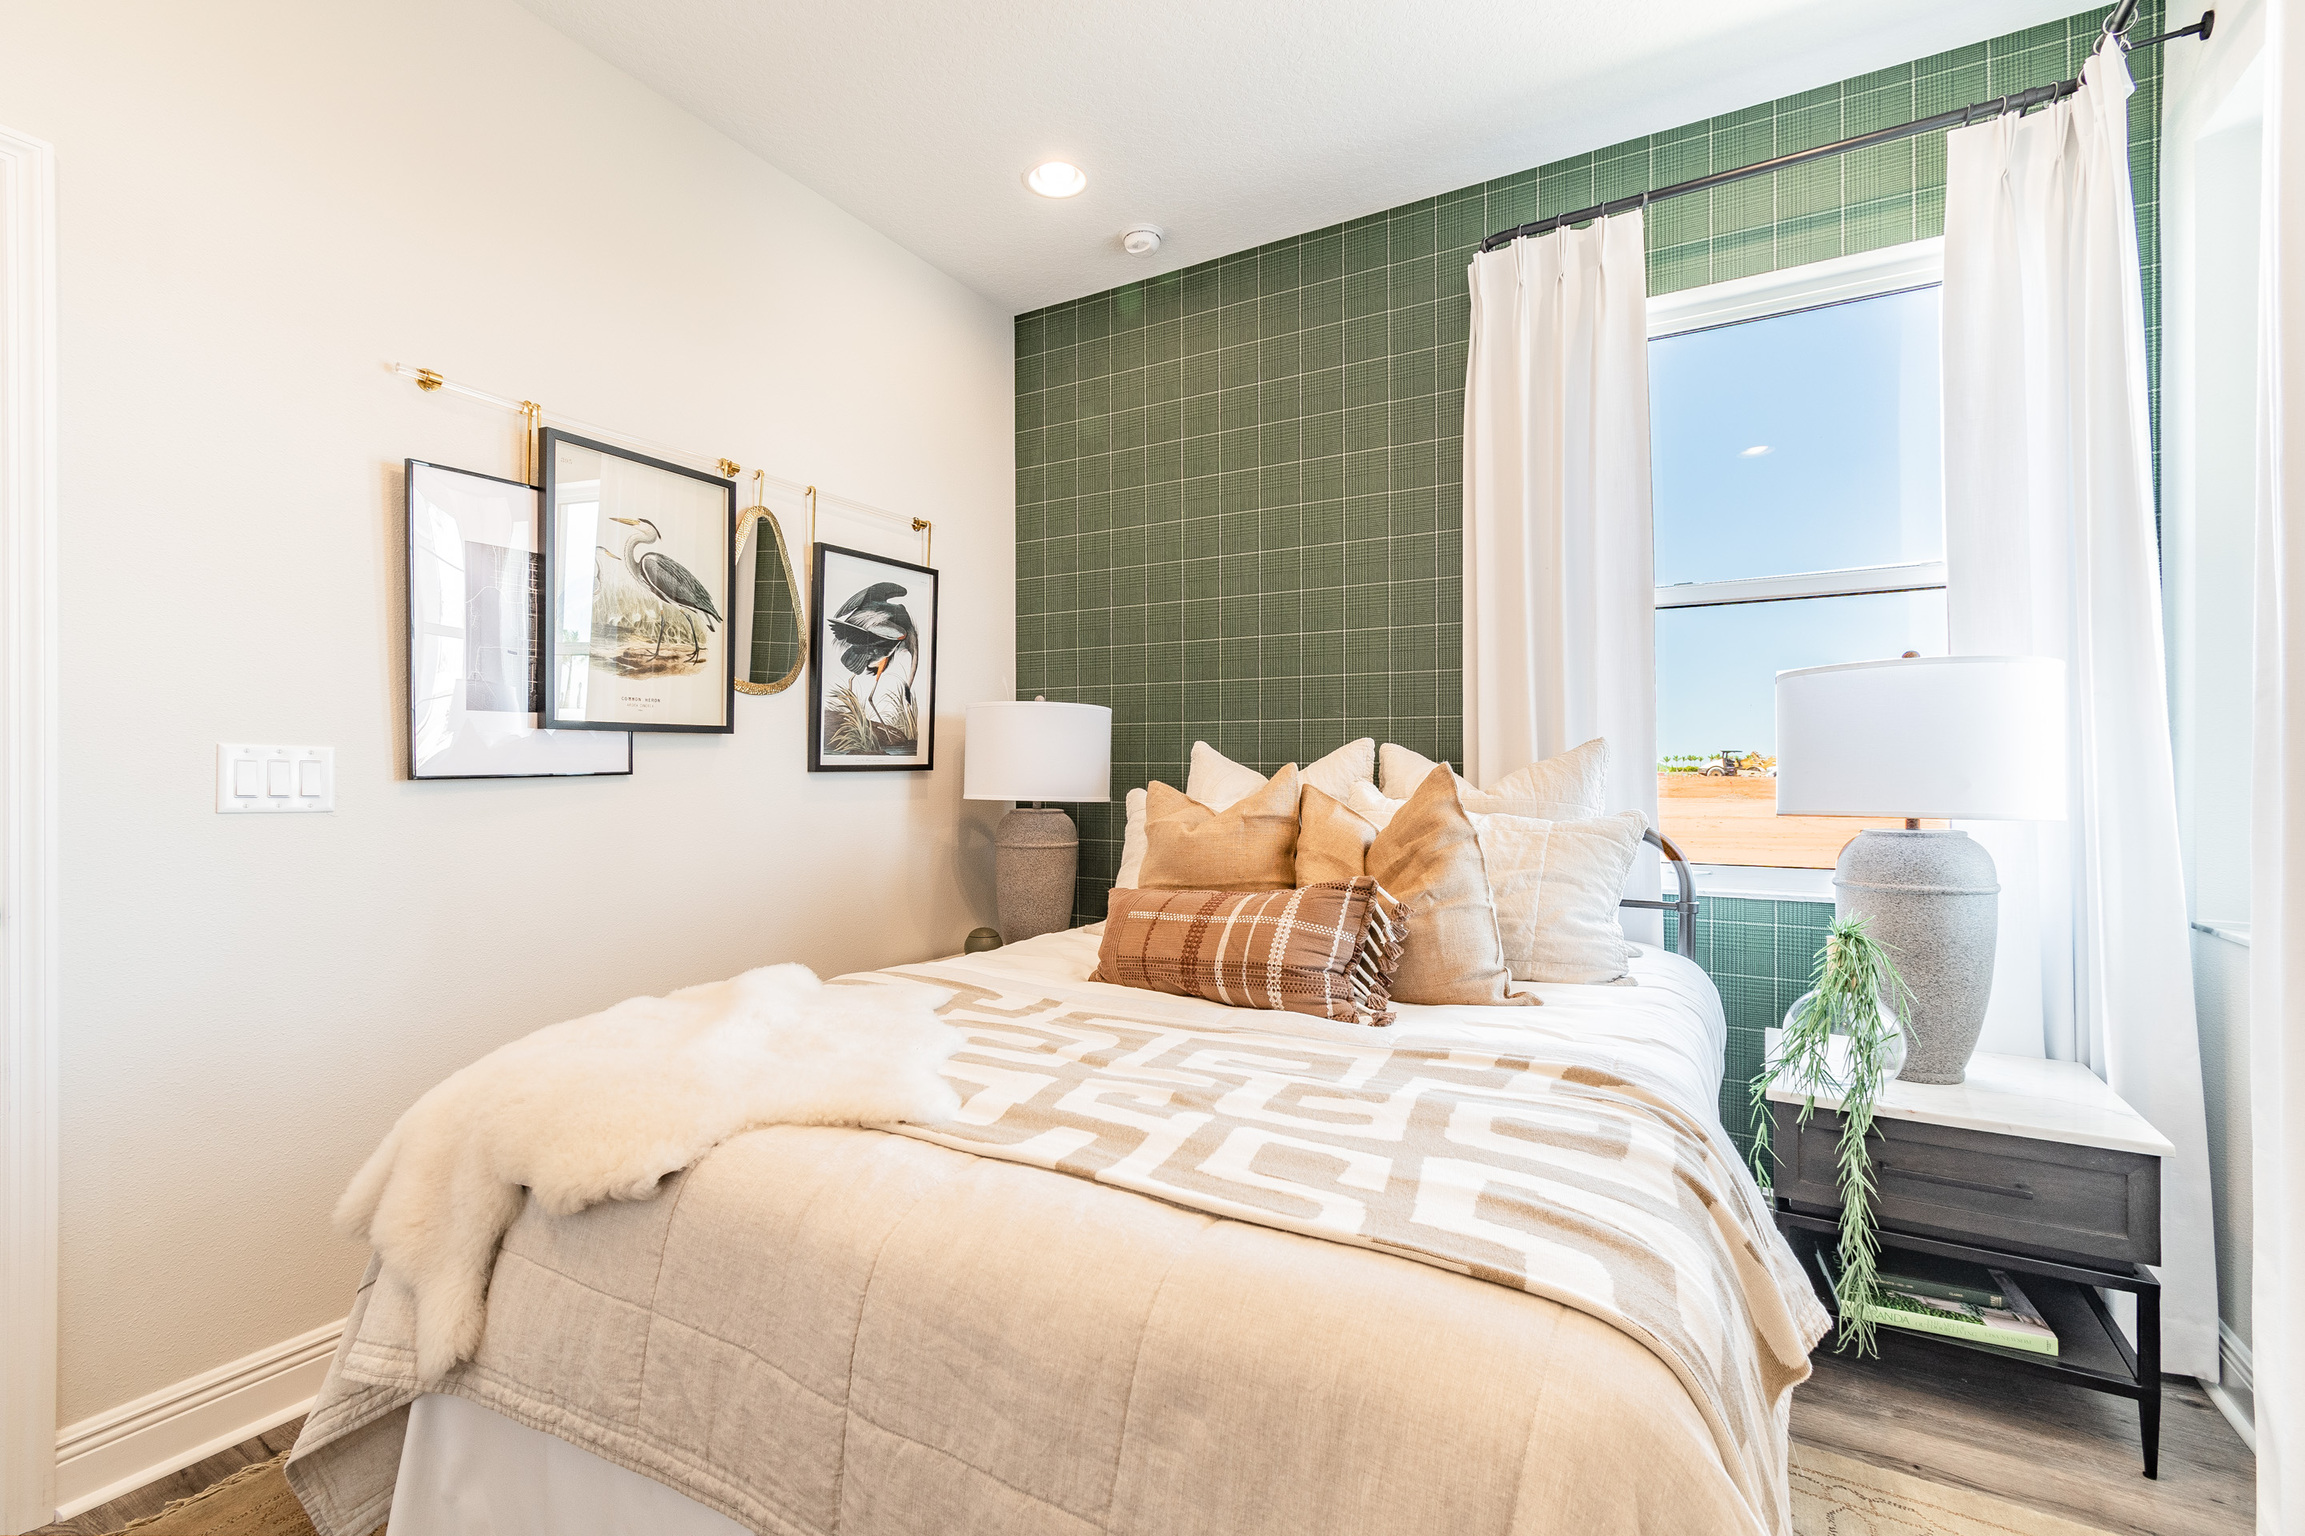 [Green and Beige Bedroom With Hanging Artwork on Wall]